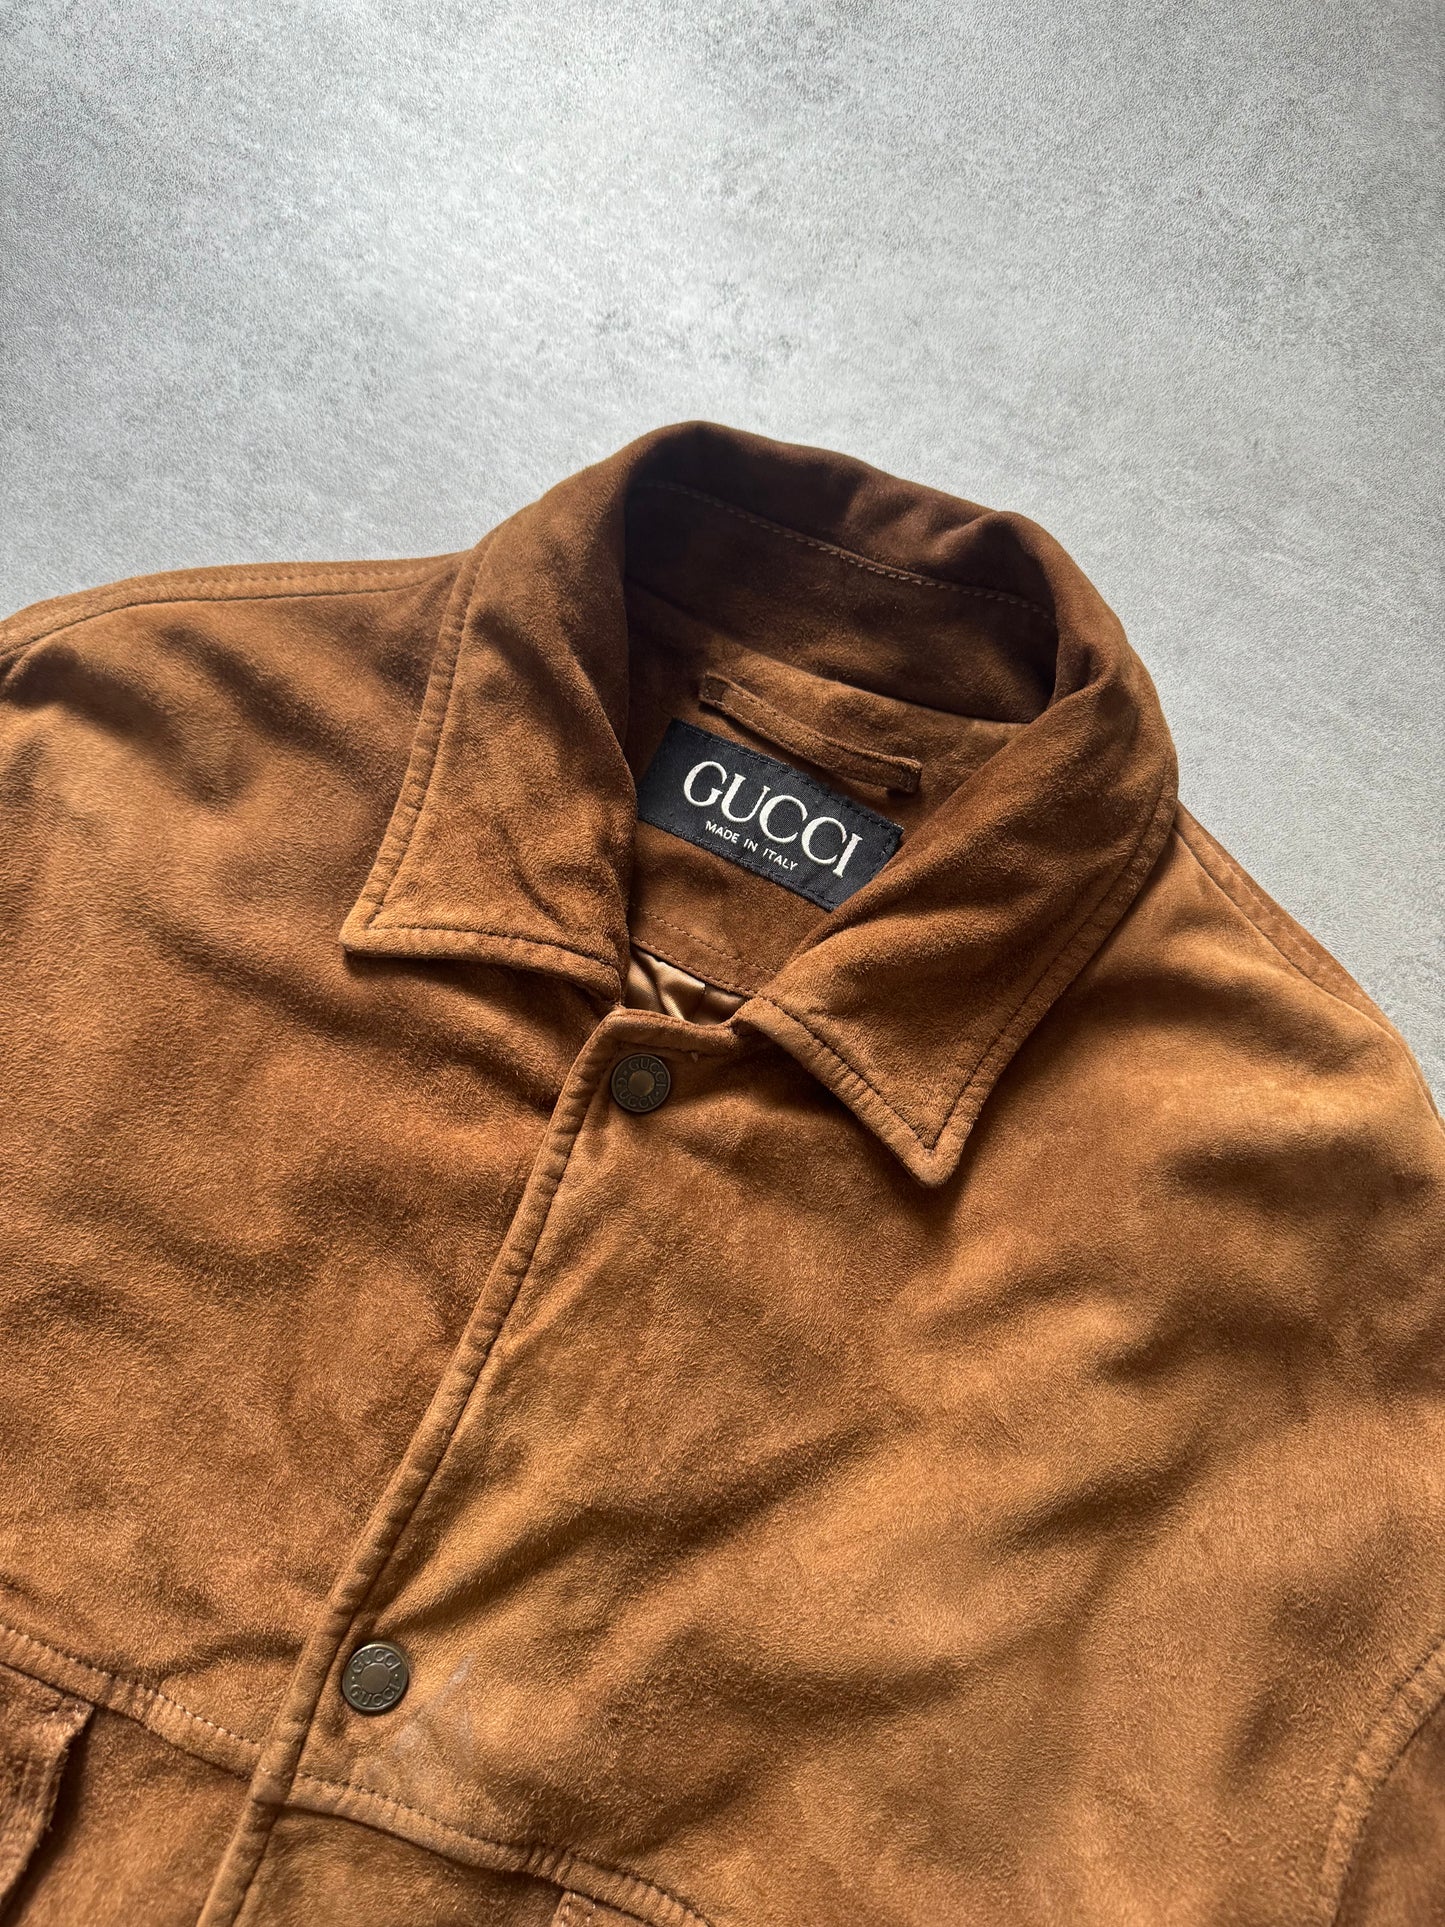 1990s Gucci by Daniel Day Camel Suede Jacket  (L) - 8